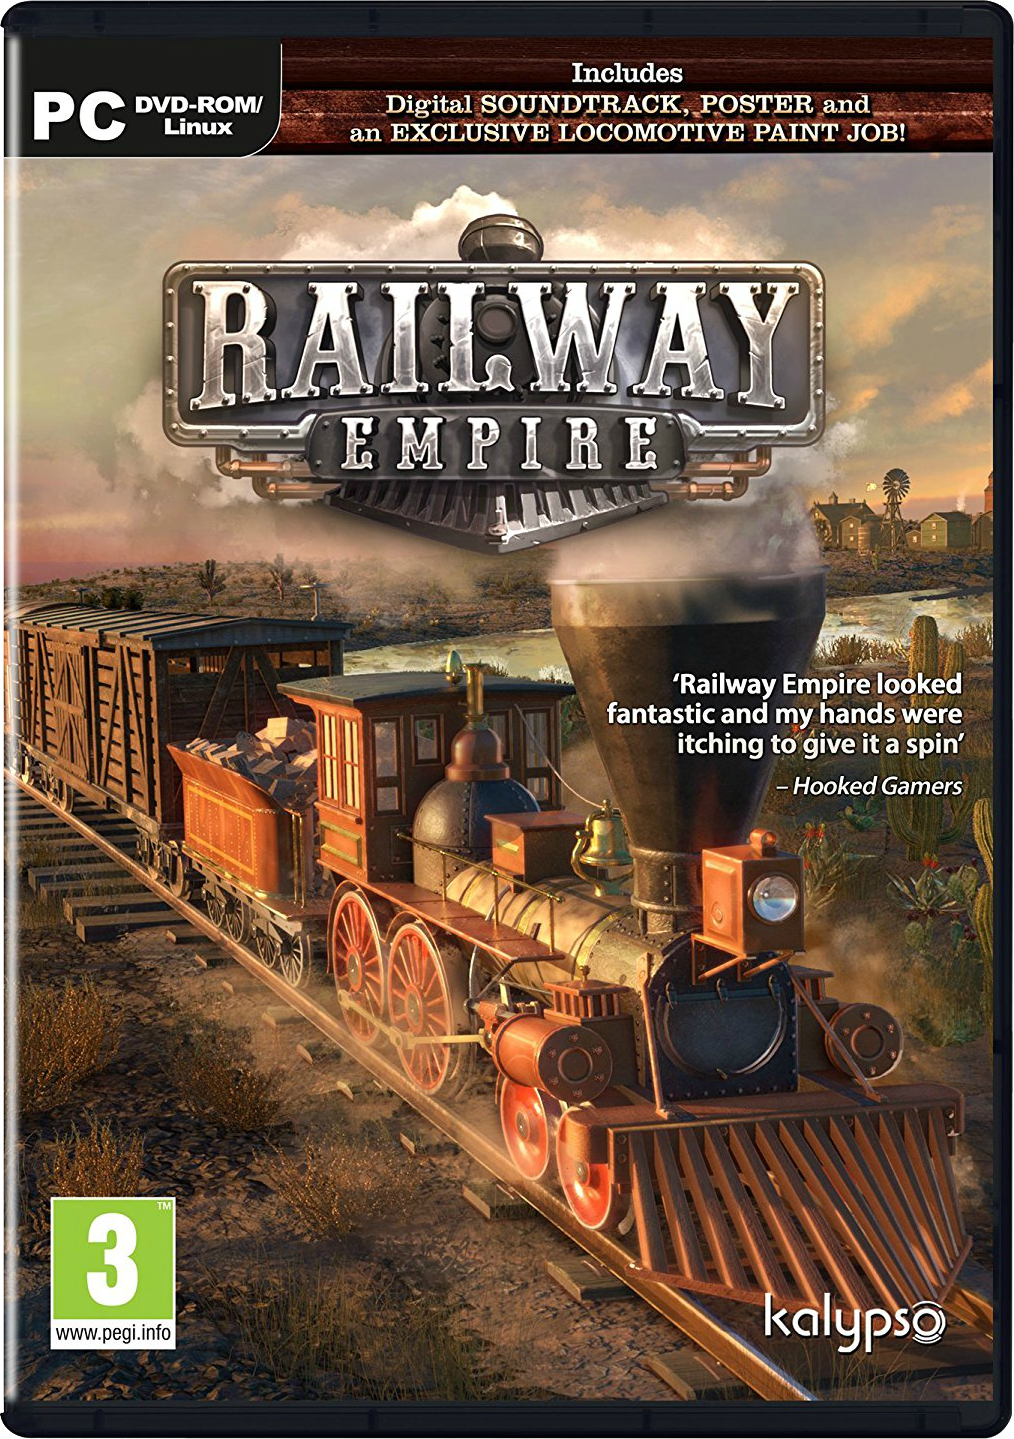 Railway Empire PC cover art.png